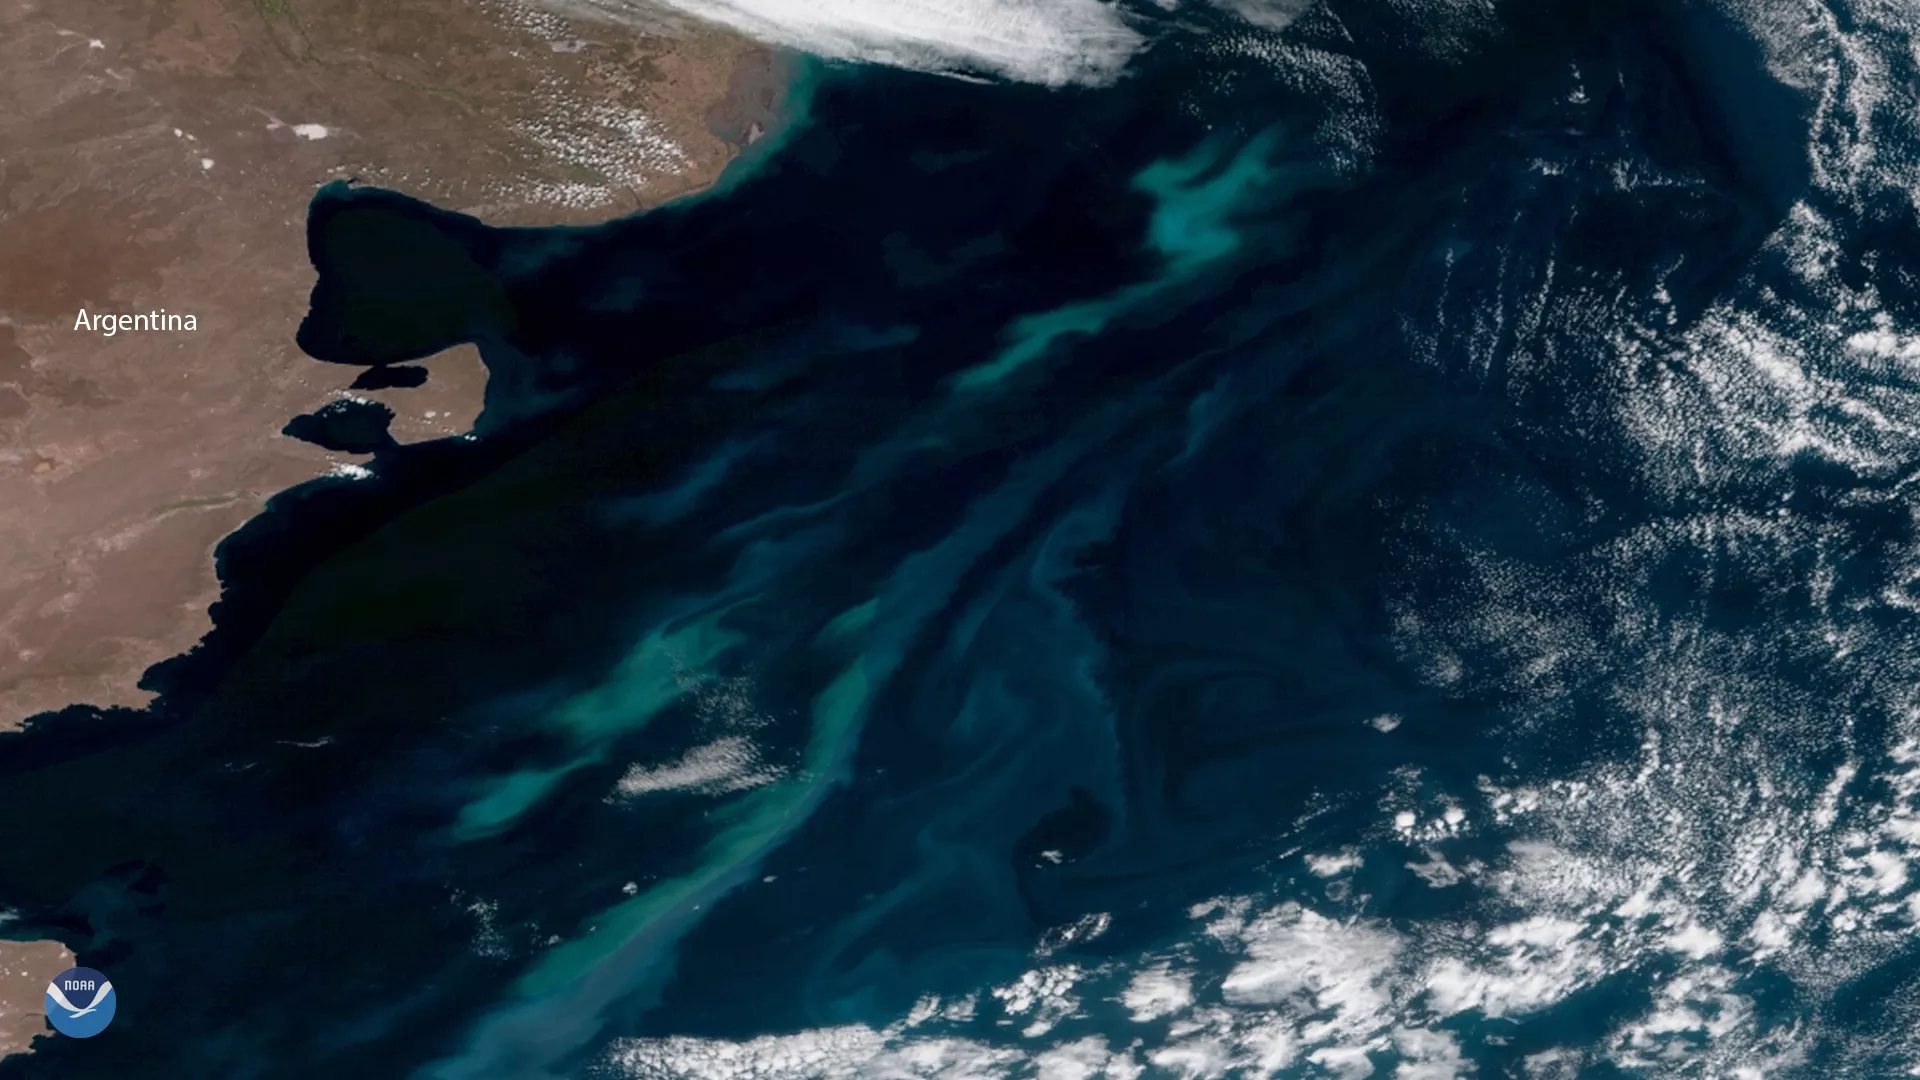 GOES East imagery of Argentinian coastline and phytoplankton bloom in turquoise green against the deeper blue of the Atlantic Ocean, taken in Jan. 2018 via GeoColor. 